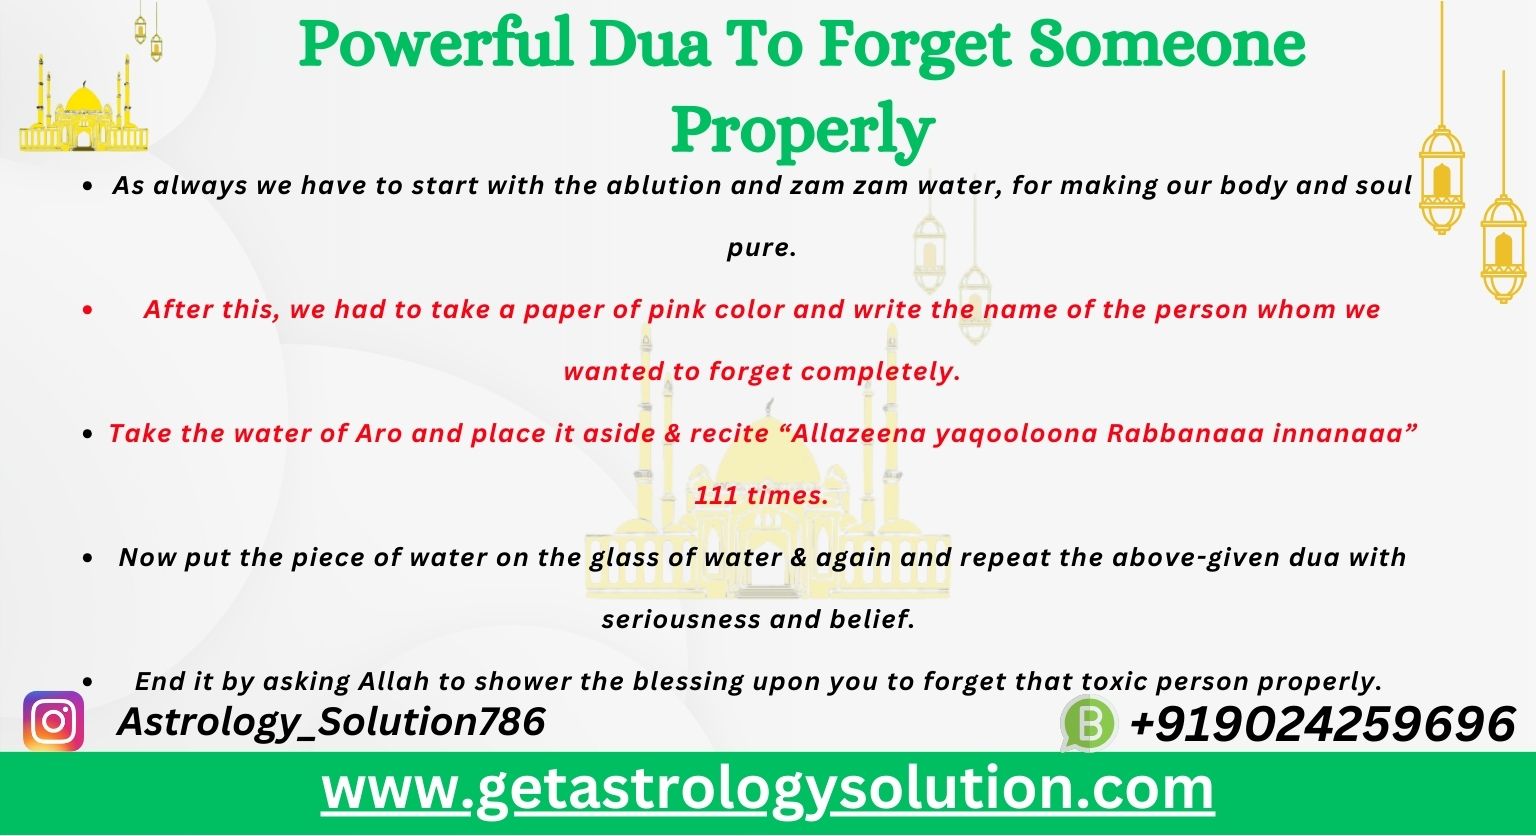 Powerful Dua To Forget Someone Properly